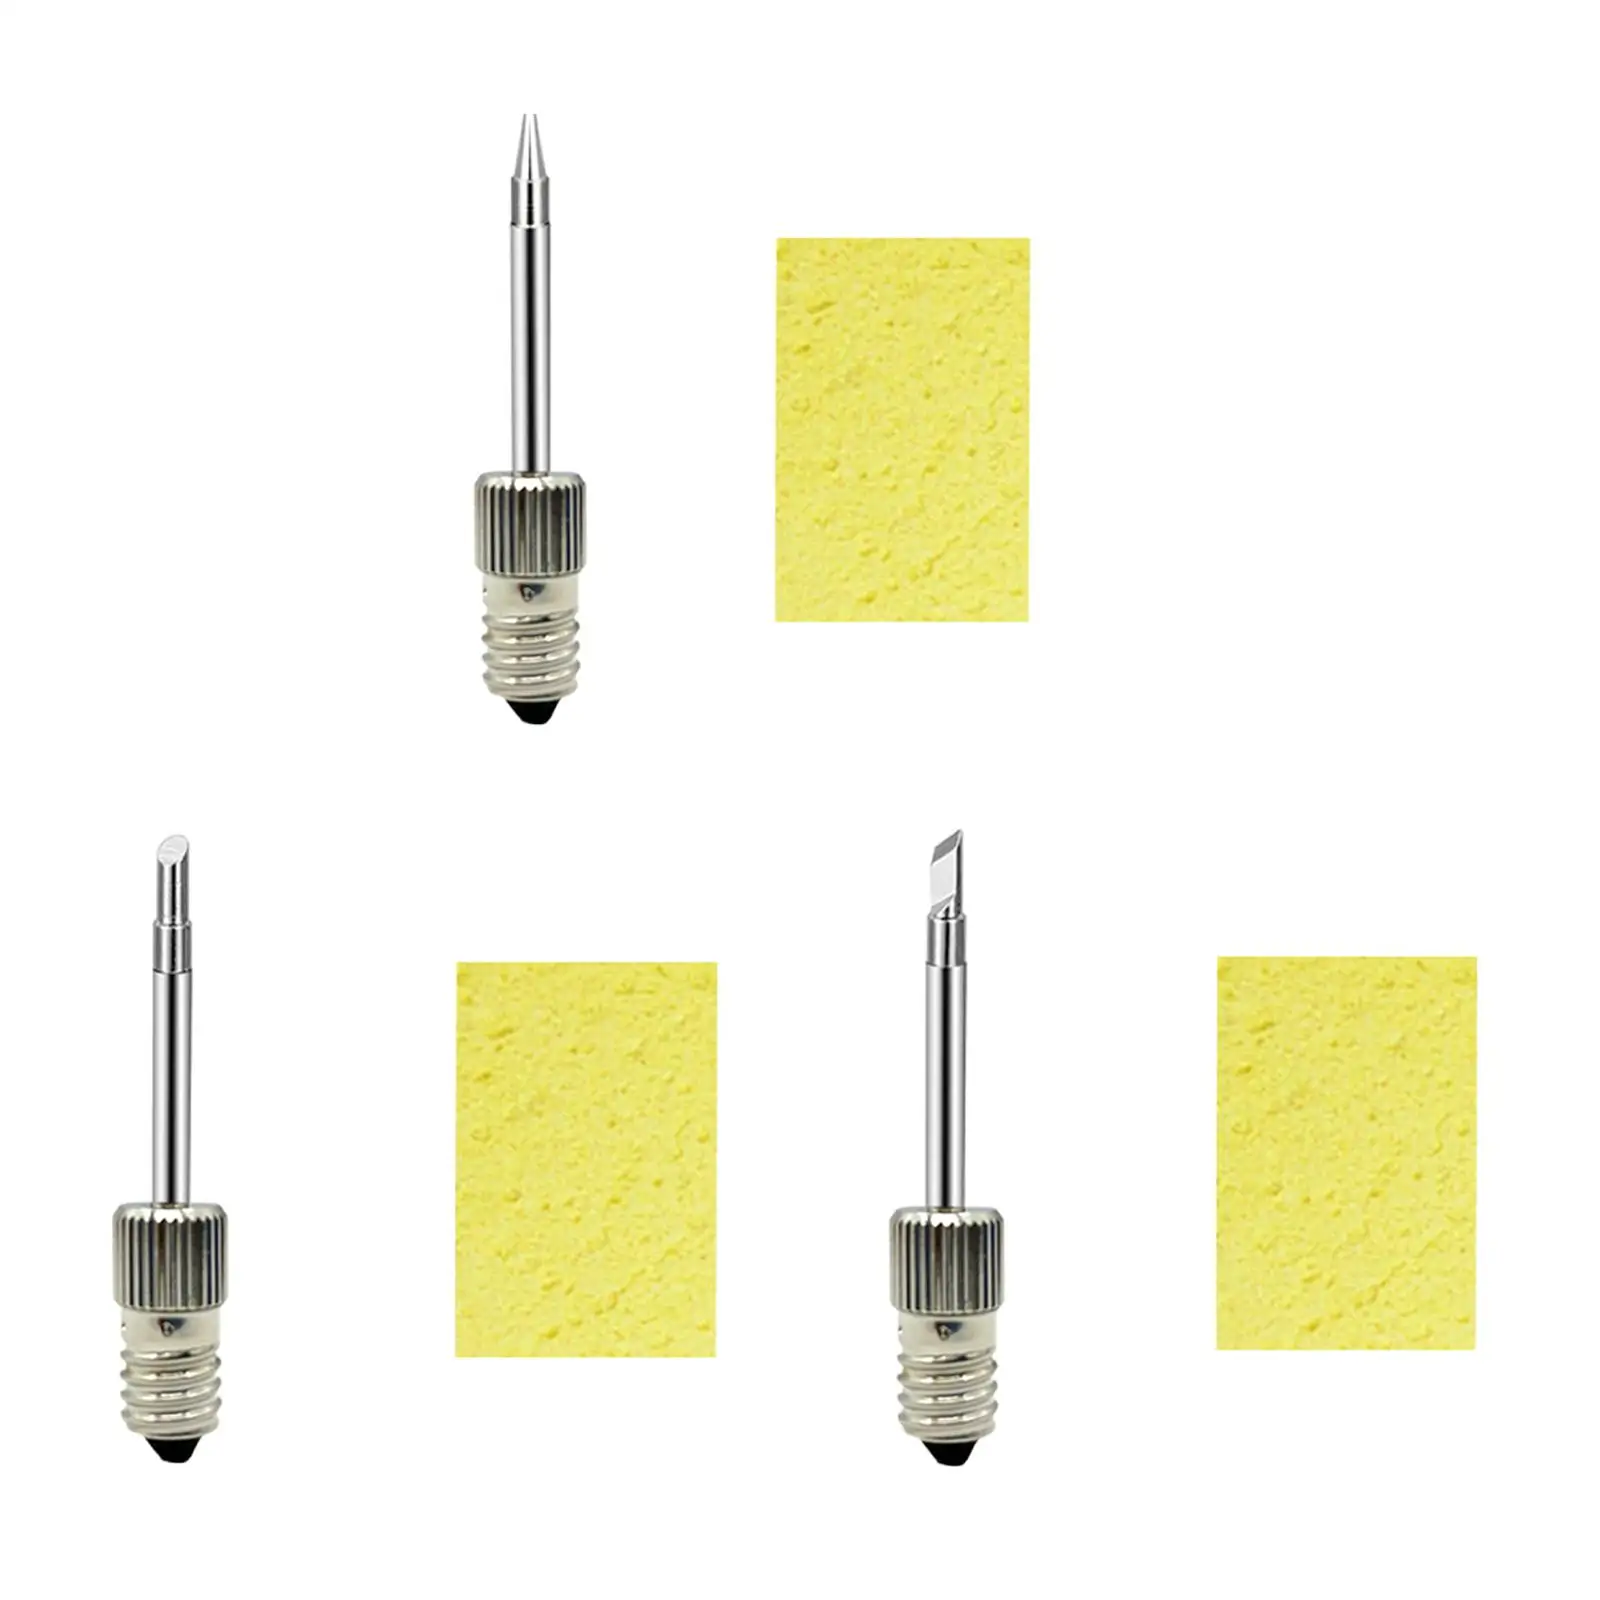 Soldering Tips Threaded Soldering Iron Head Replacement for E10 Interface